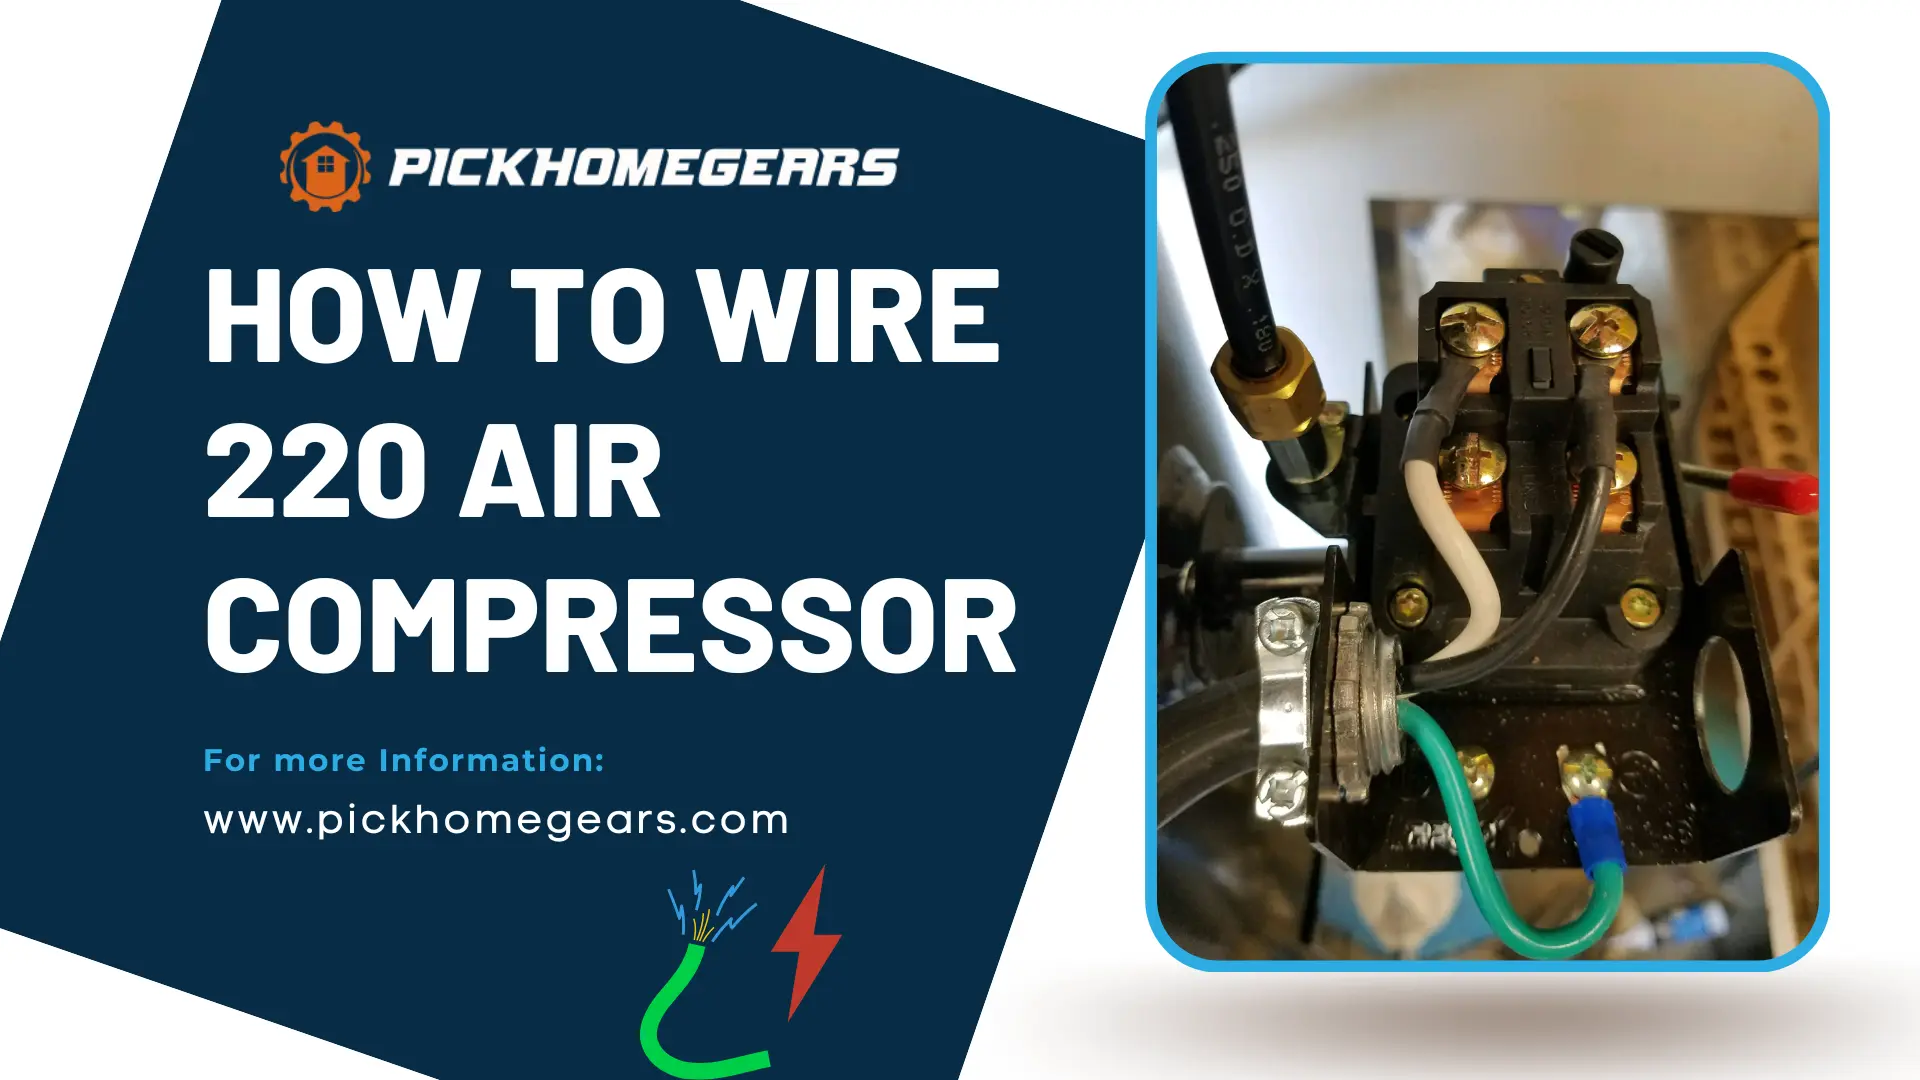 How To Wire 220 Air Compressor